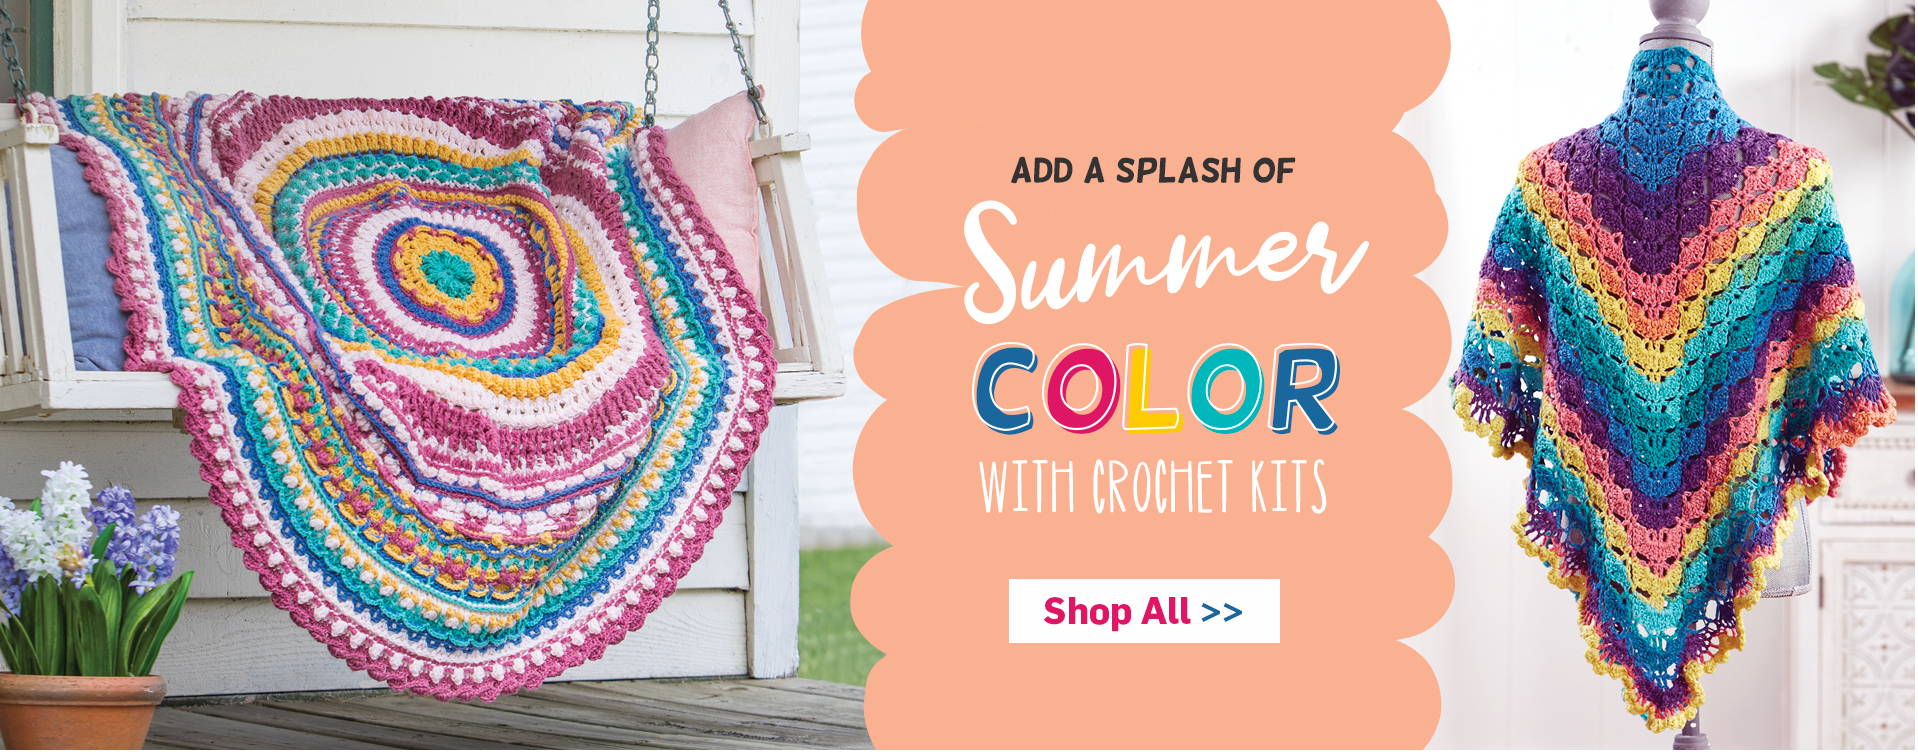 Add a Splash of Summer Color with Crochet Kits